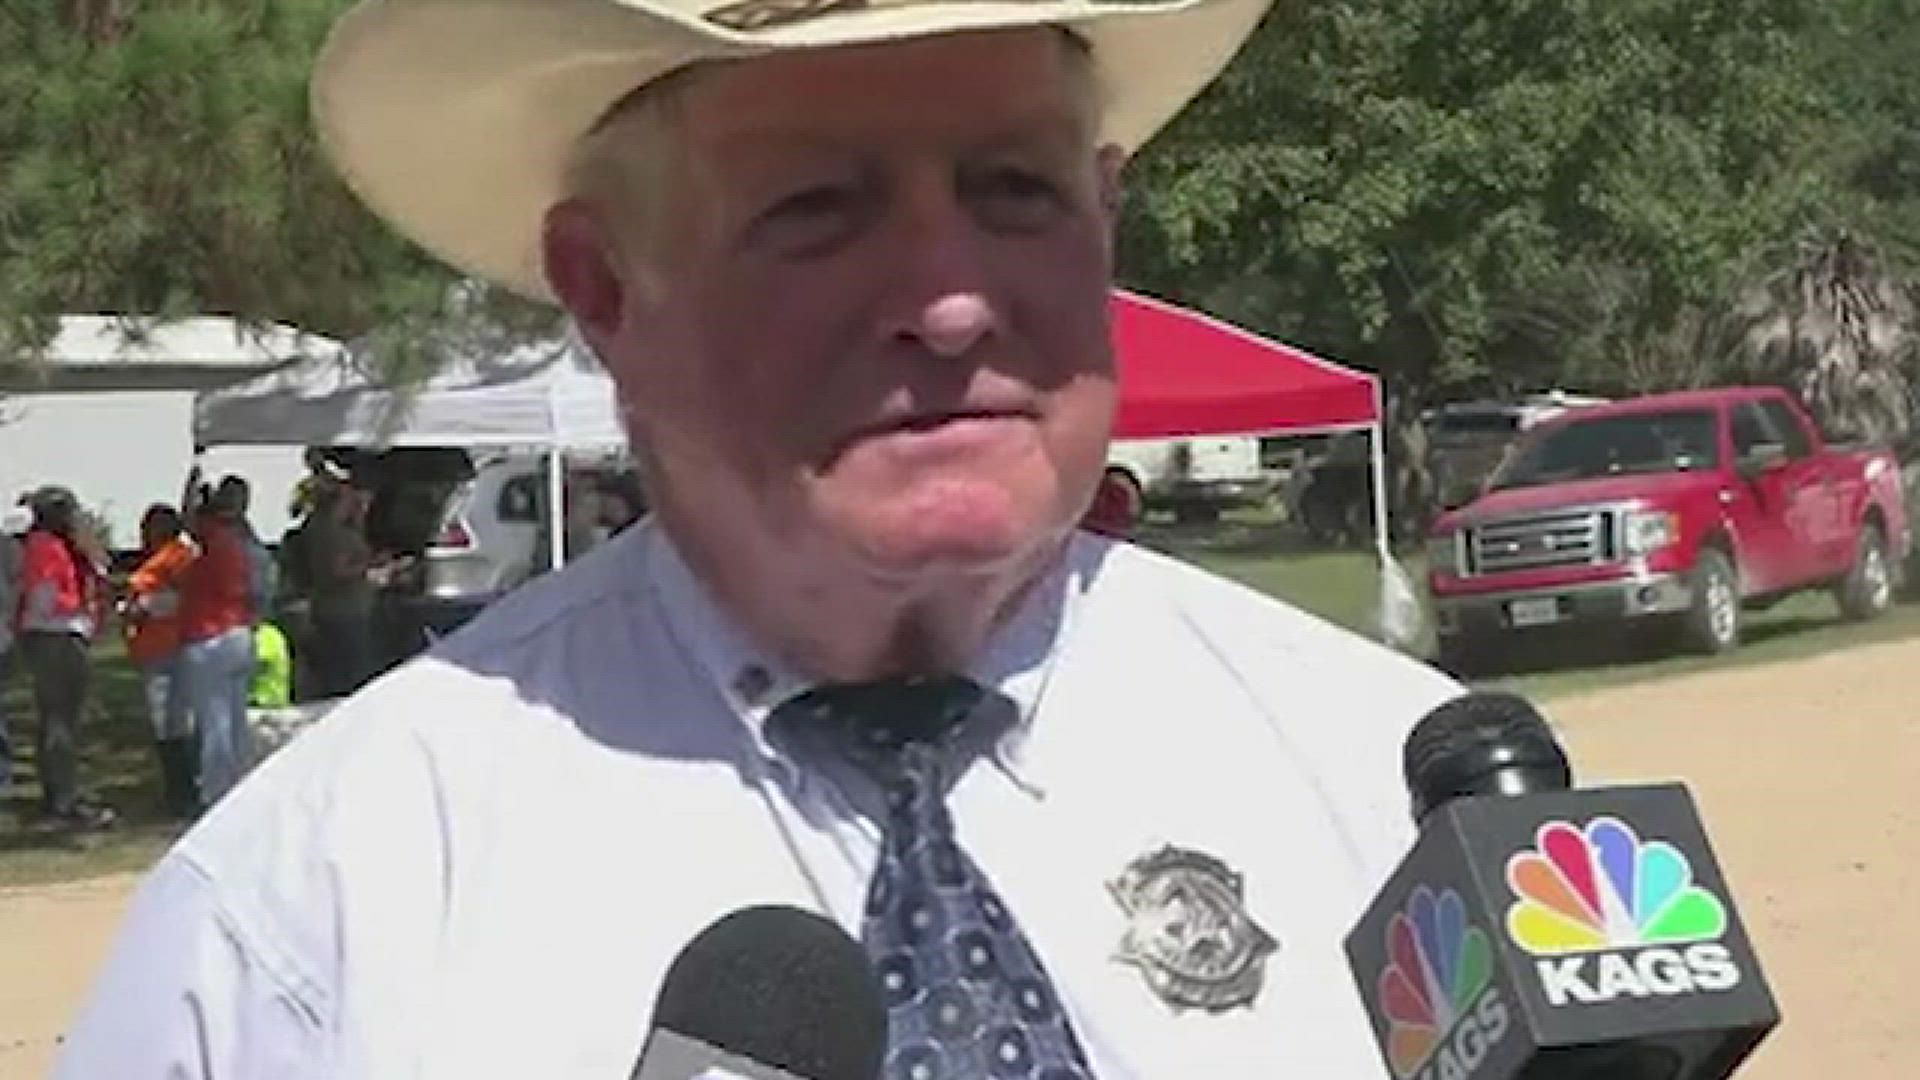 Grimes County Sheriff Don Sowell and Equusearch's Tim Miller talk to the media after news of Christopher Ramirez being found safe. (Video from KAGS-TV)